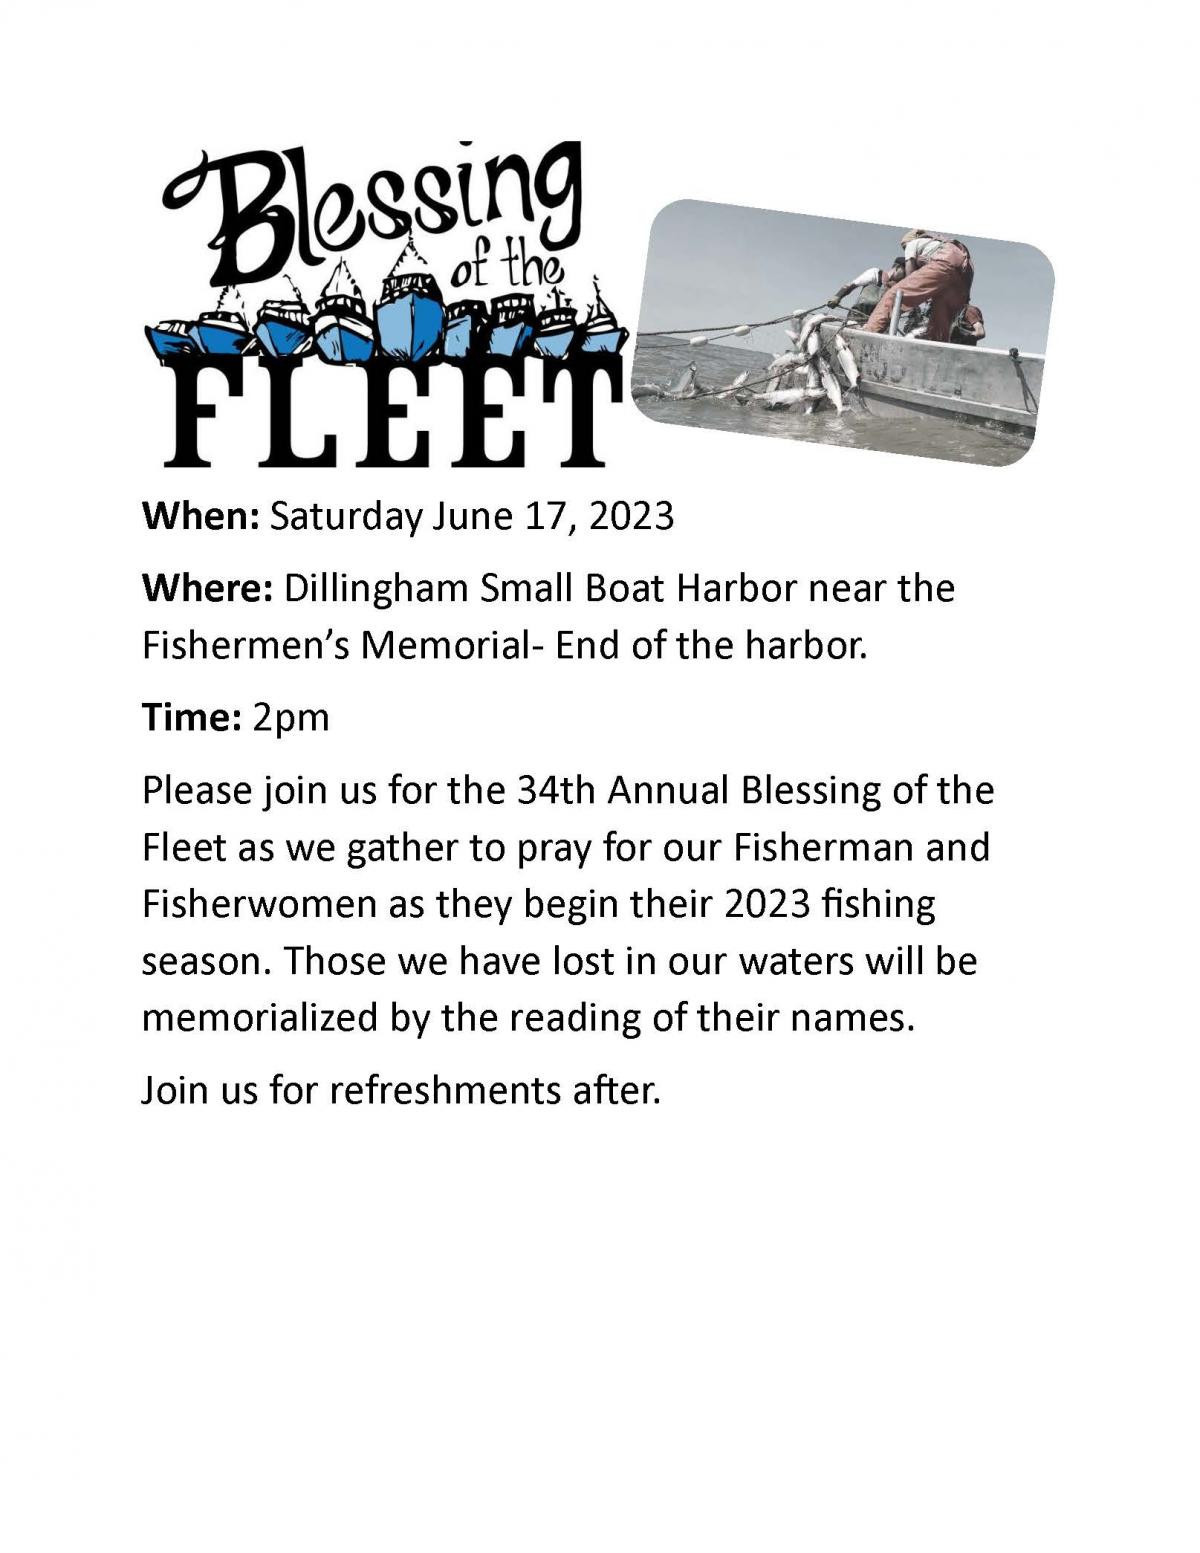 34th Annual Blessing of the Fleet